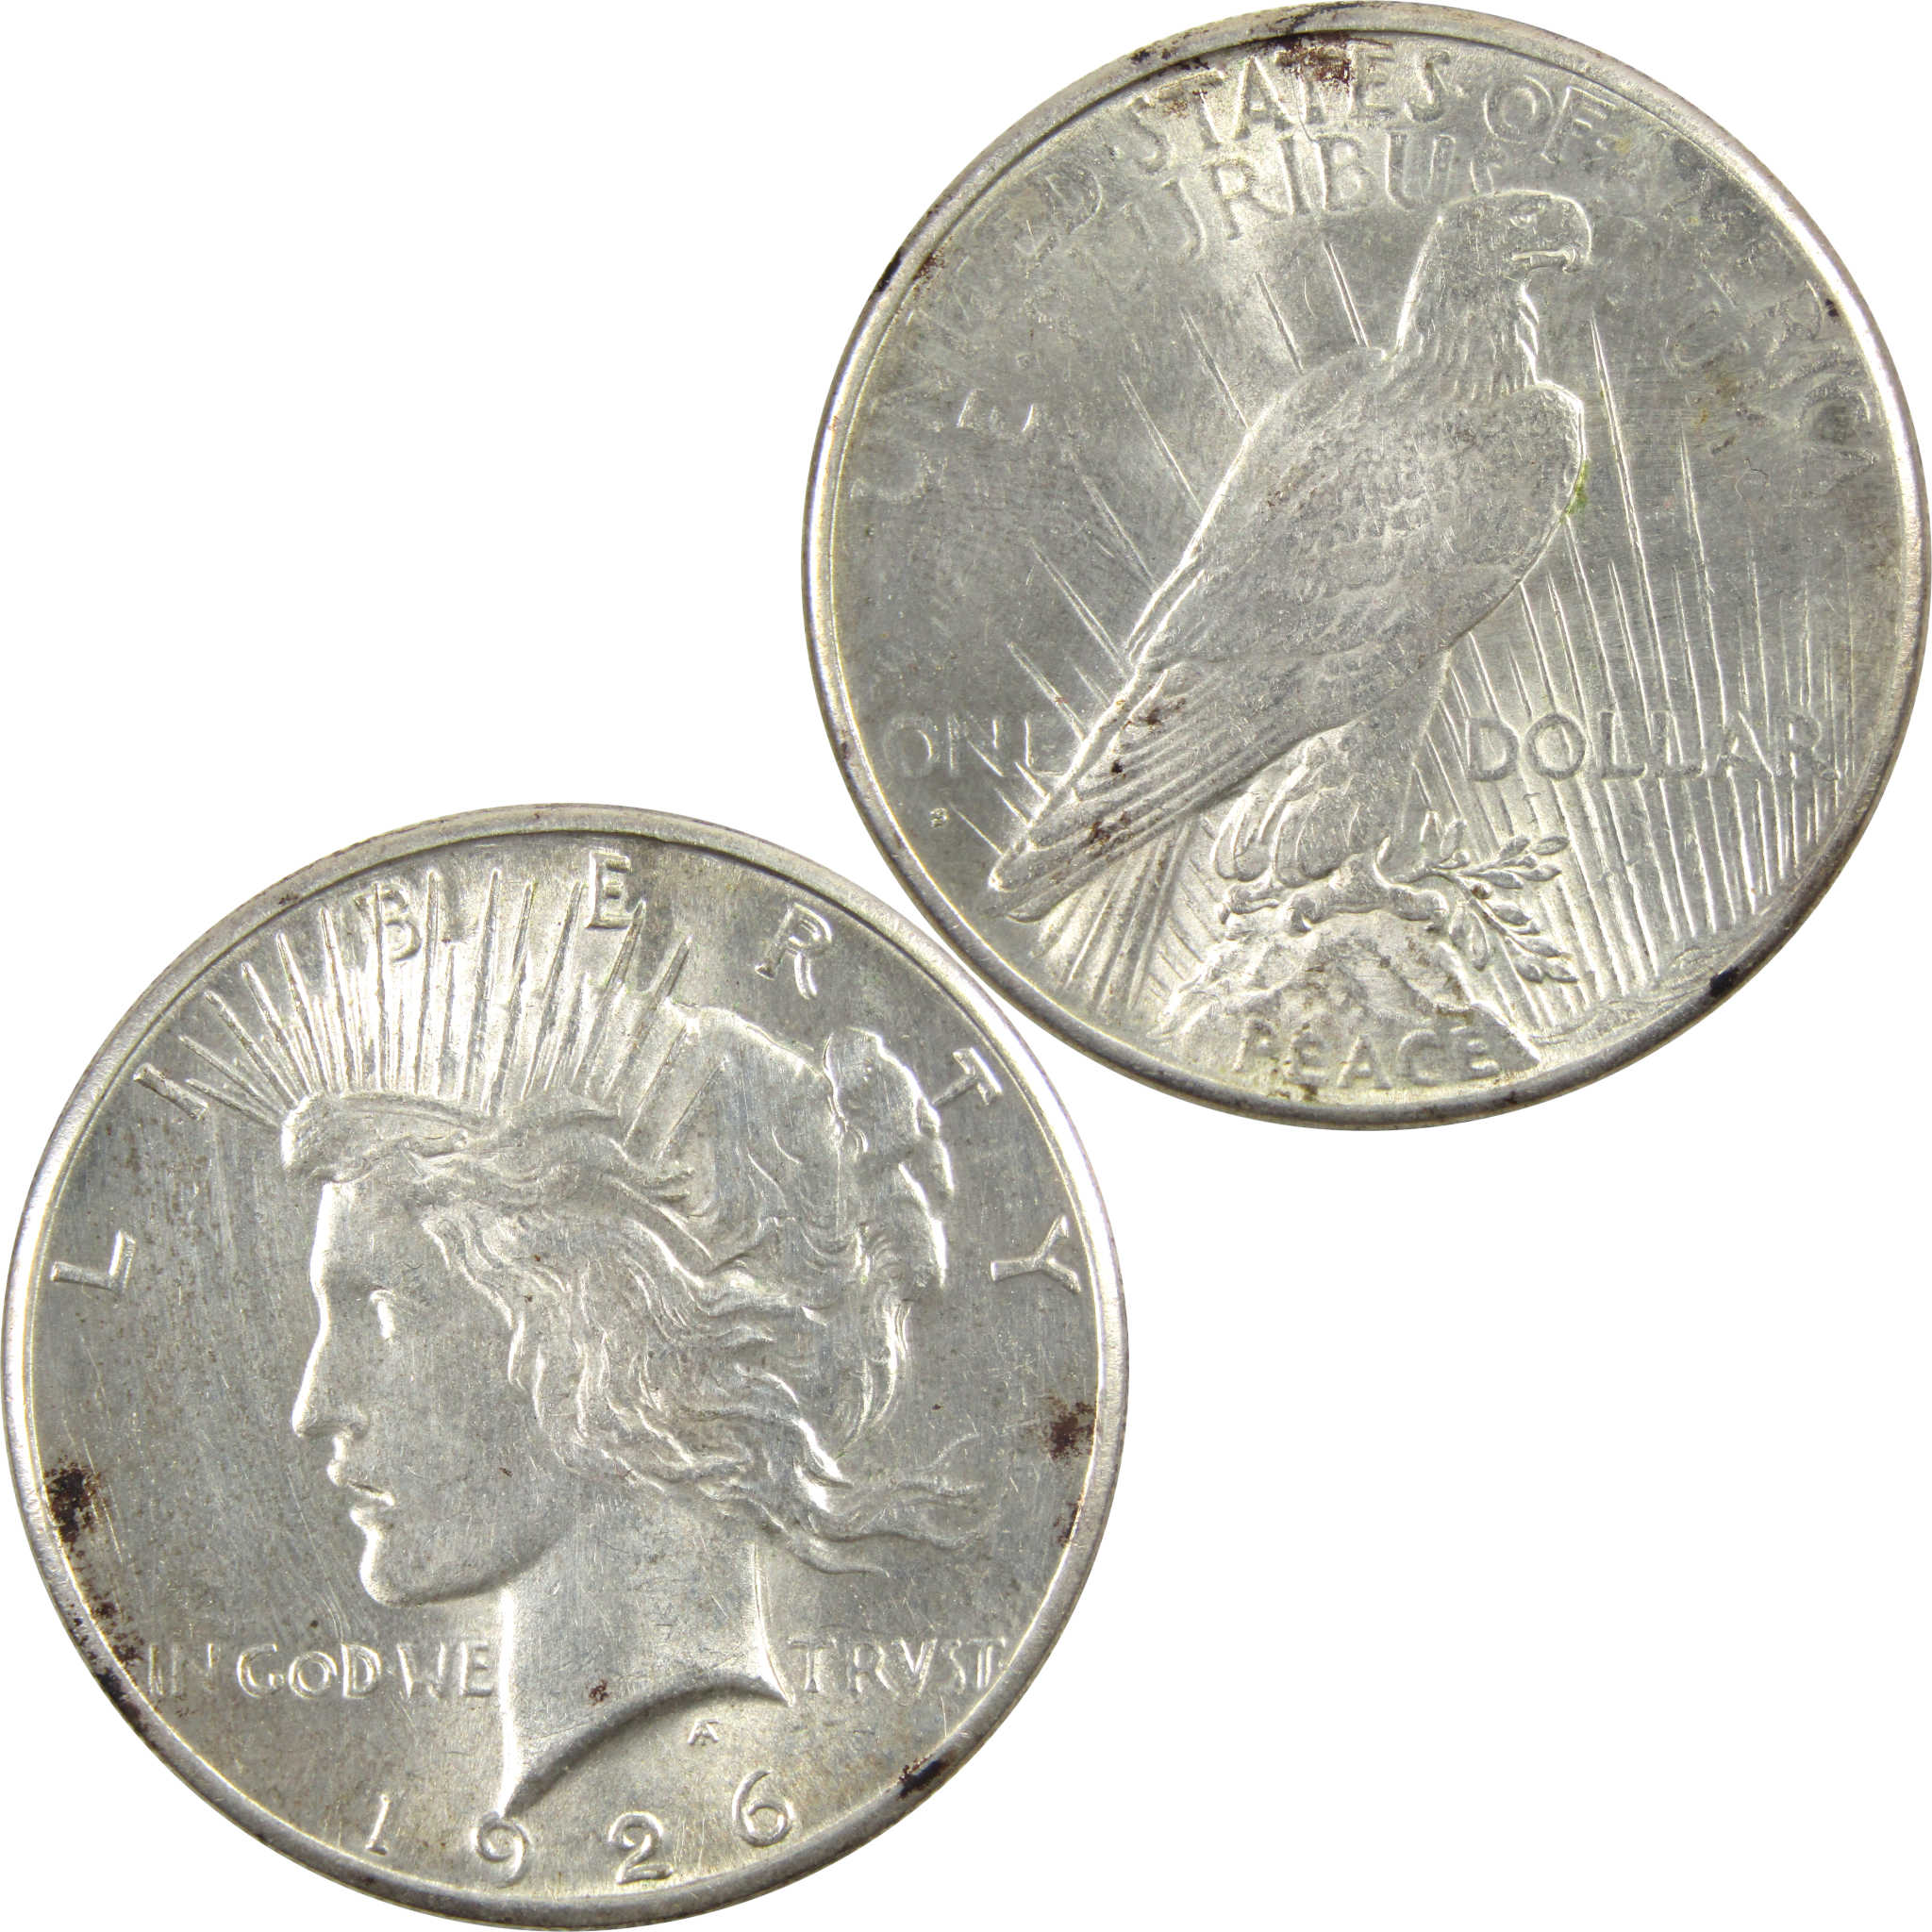 1926 S Peace Dollar AU About Uncirculated 90% Silver $1 Coin SKU:I5739